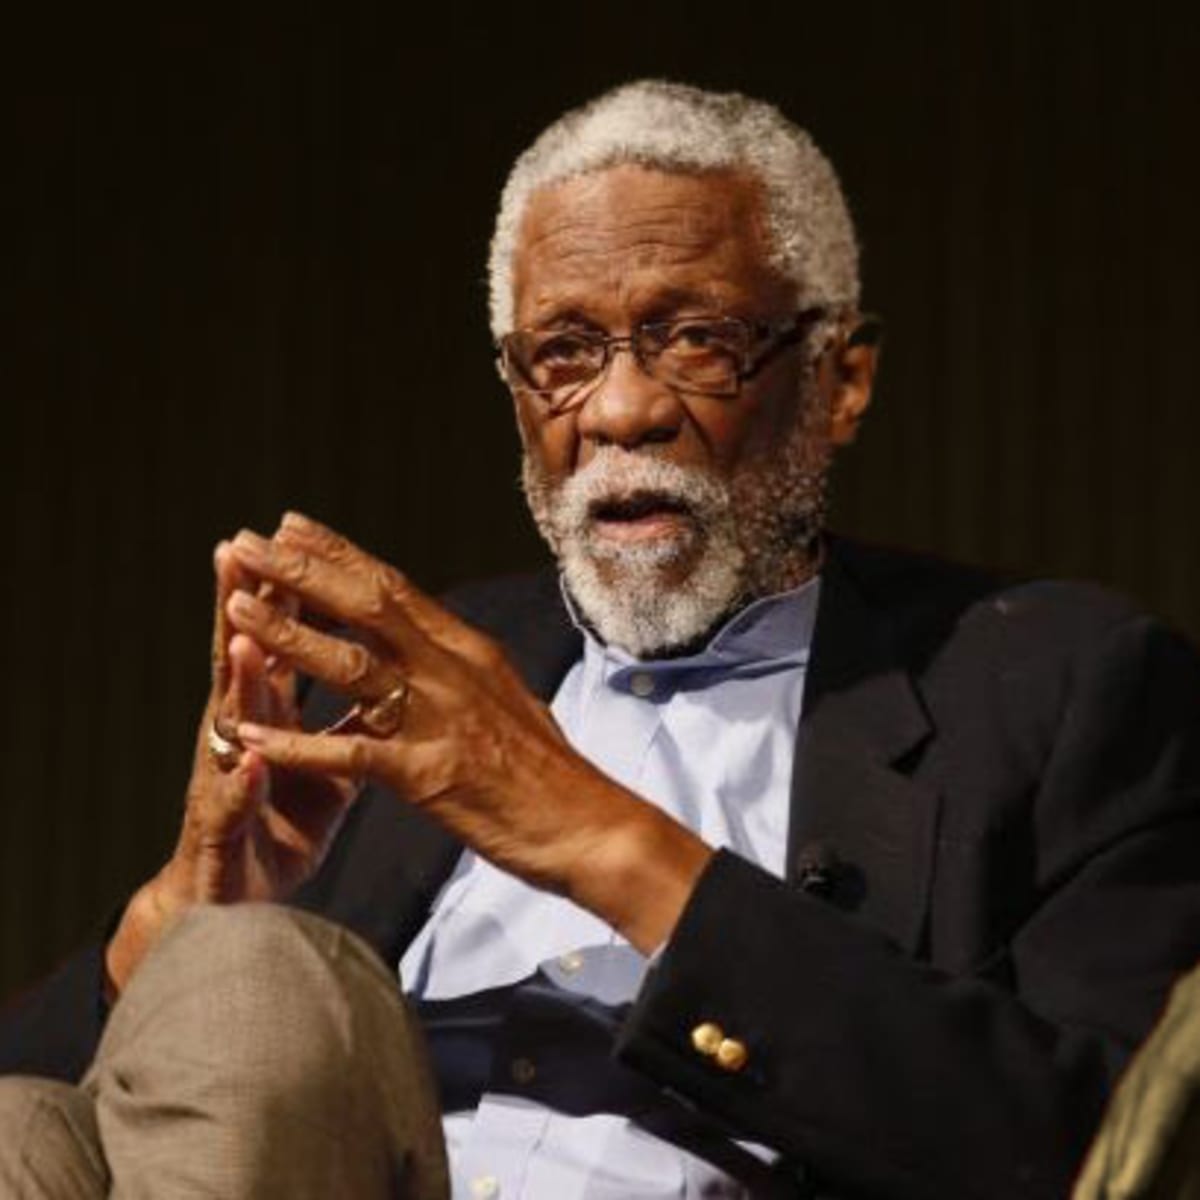 Why Bill Russell refused to sign autographs - Basketball Network 